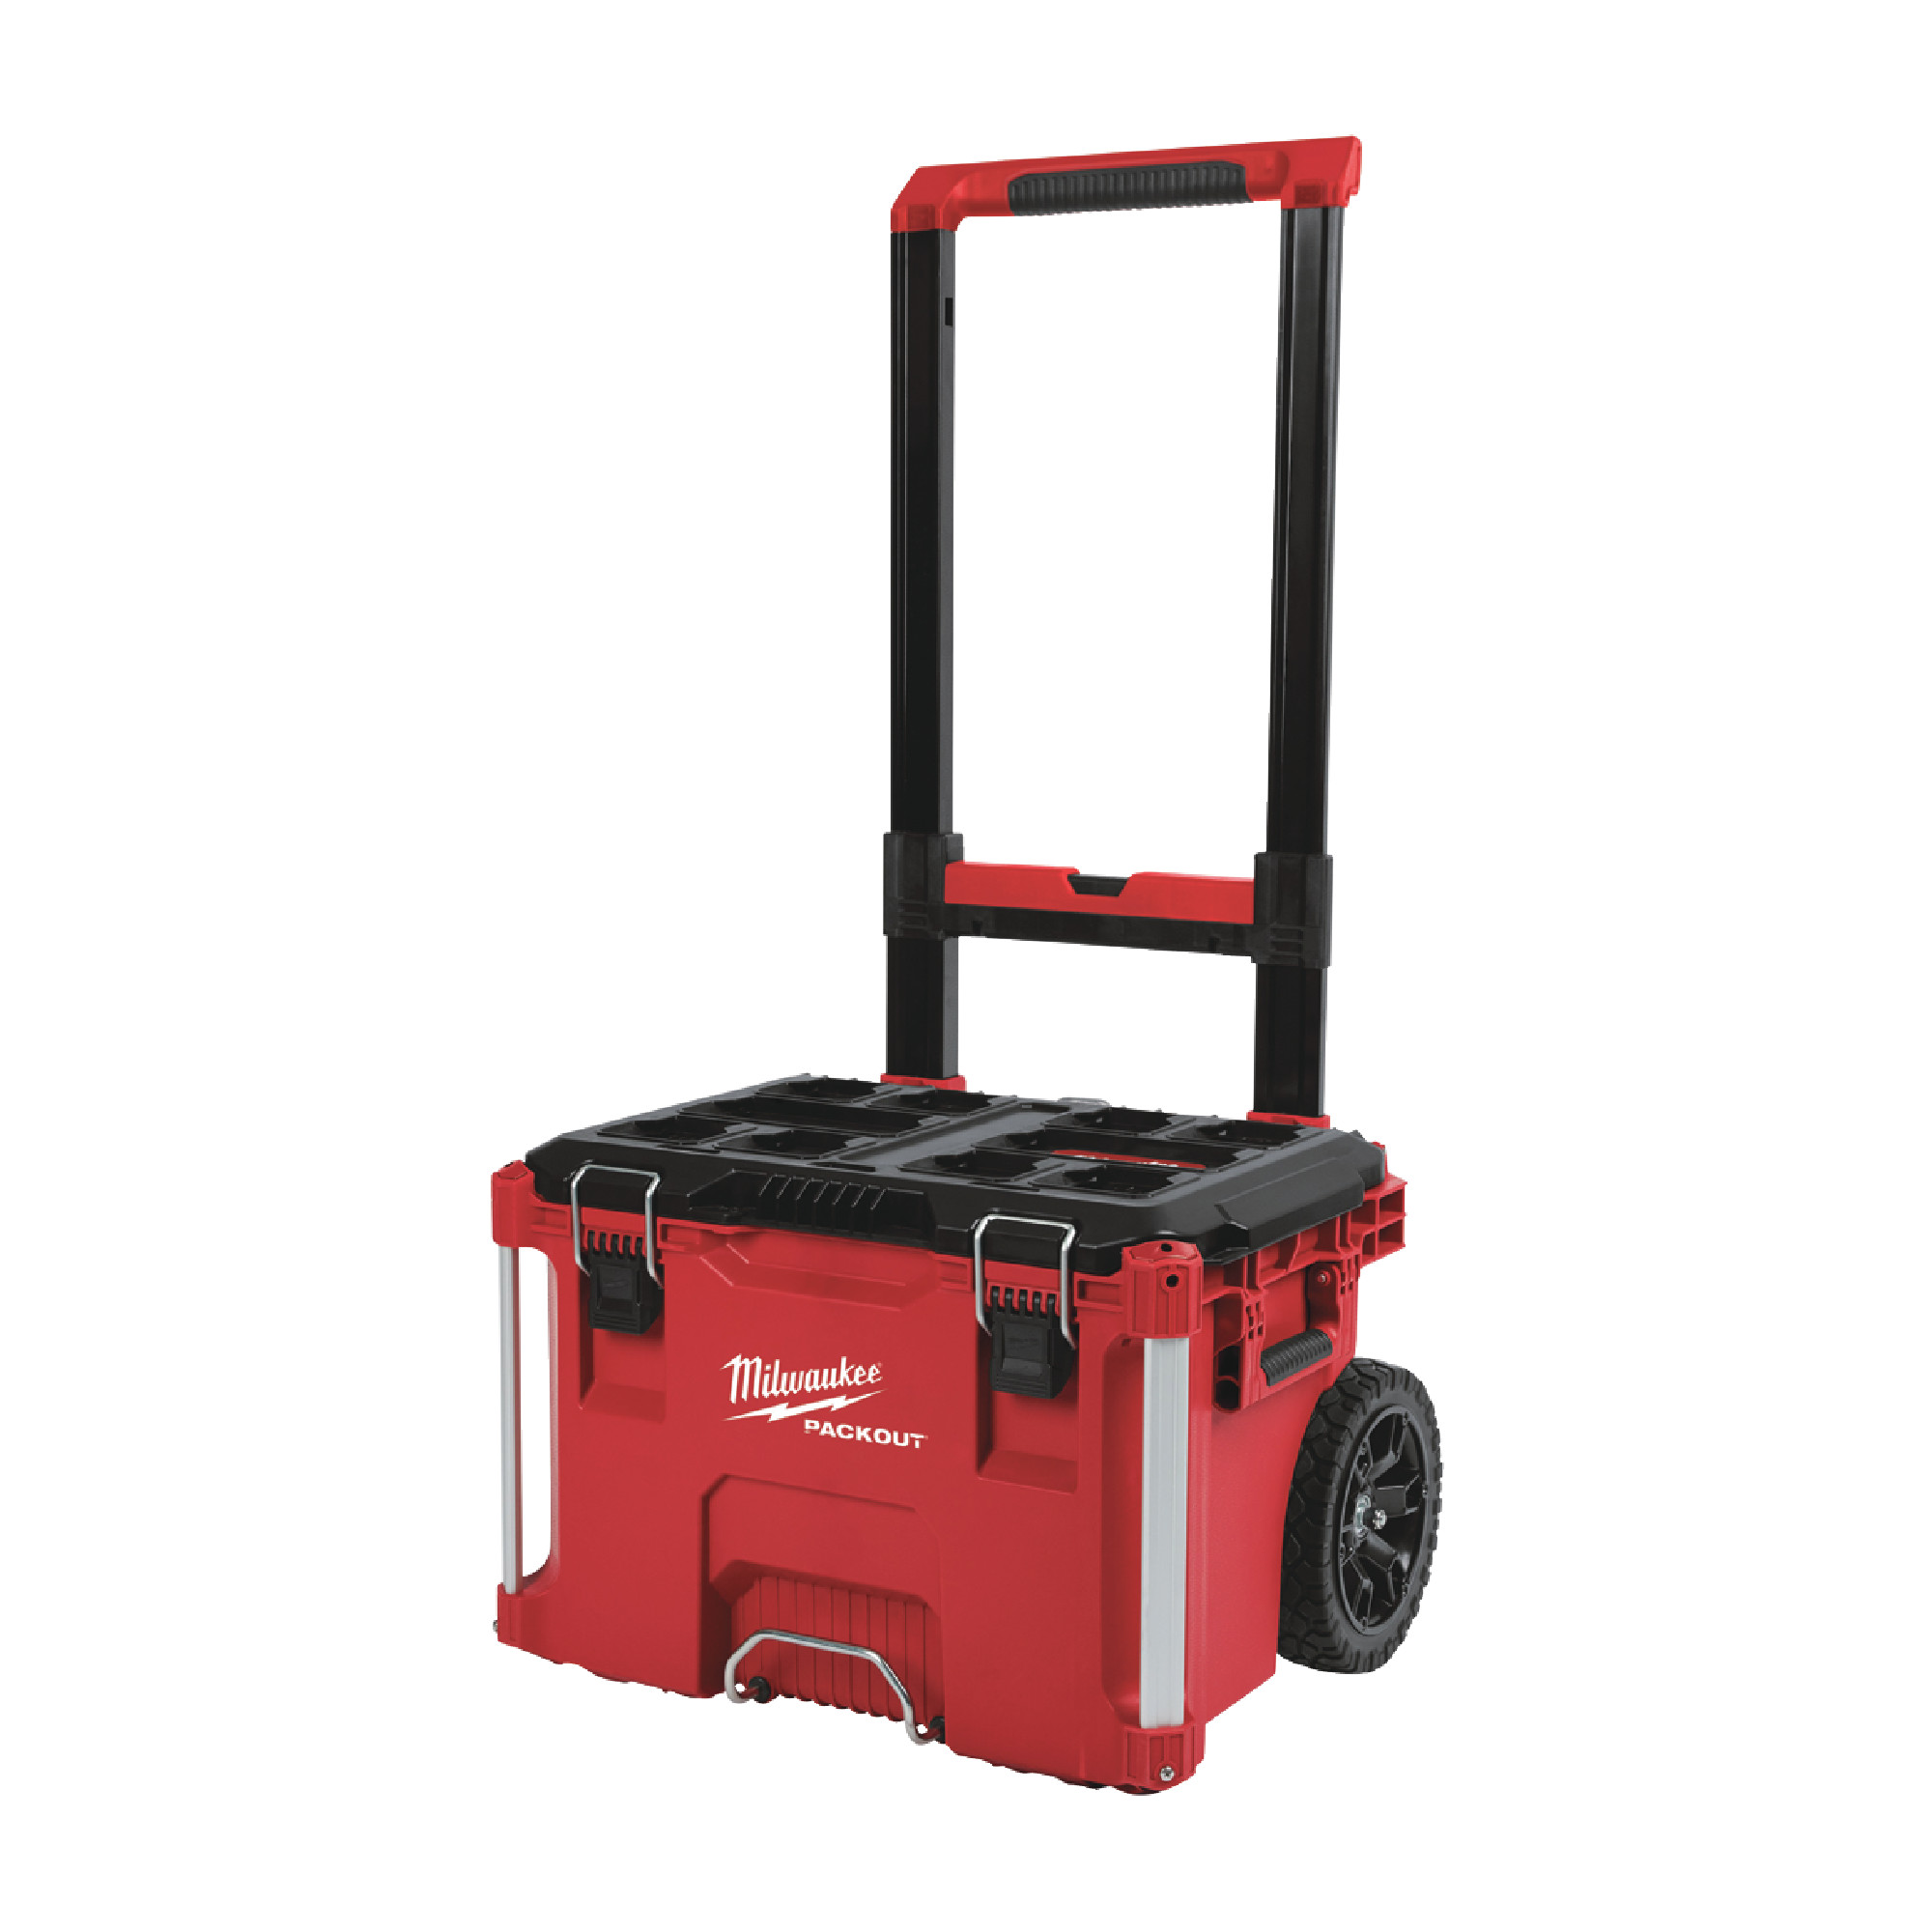 MILWAUKEE PACKOUT Rolling Tool Box